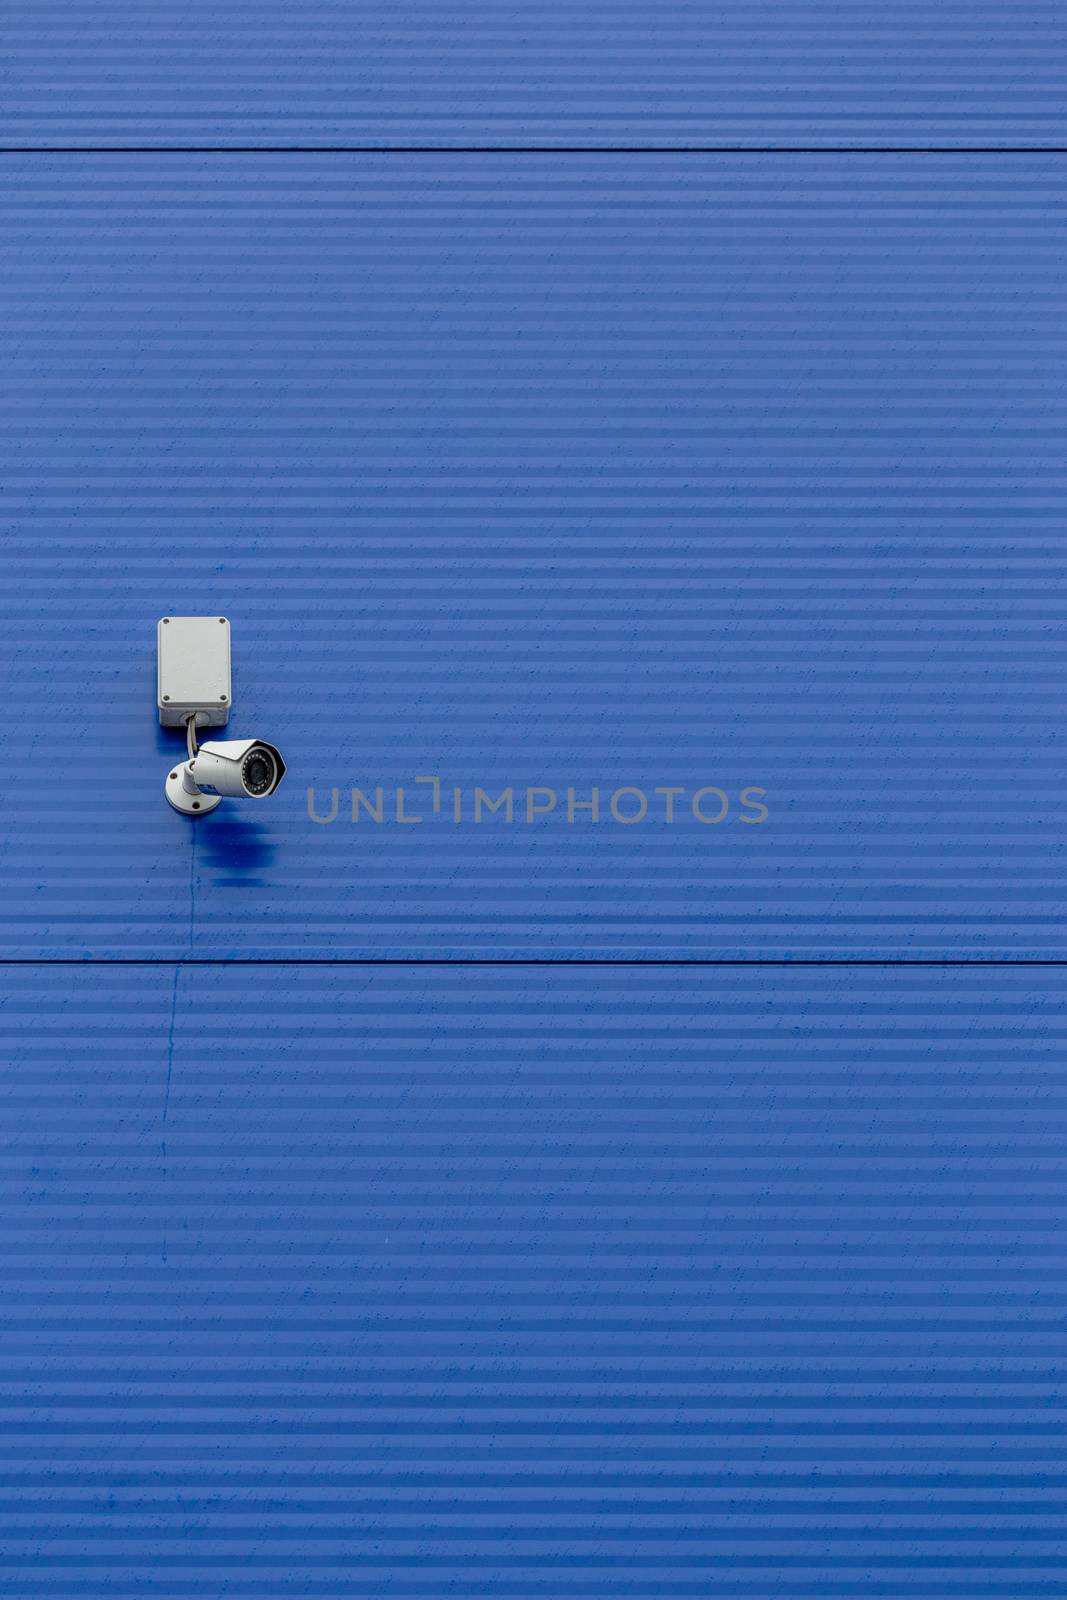 small white security camera on large blue steel silo wall.